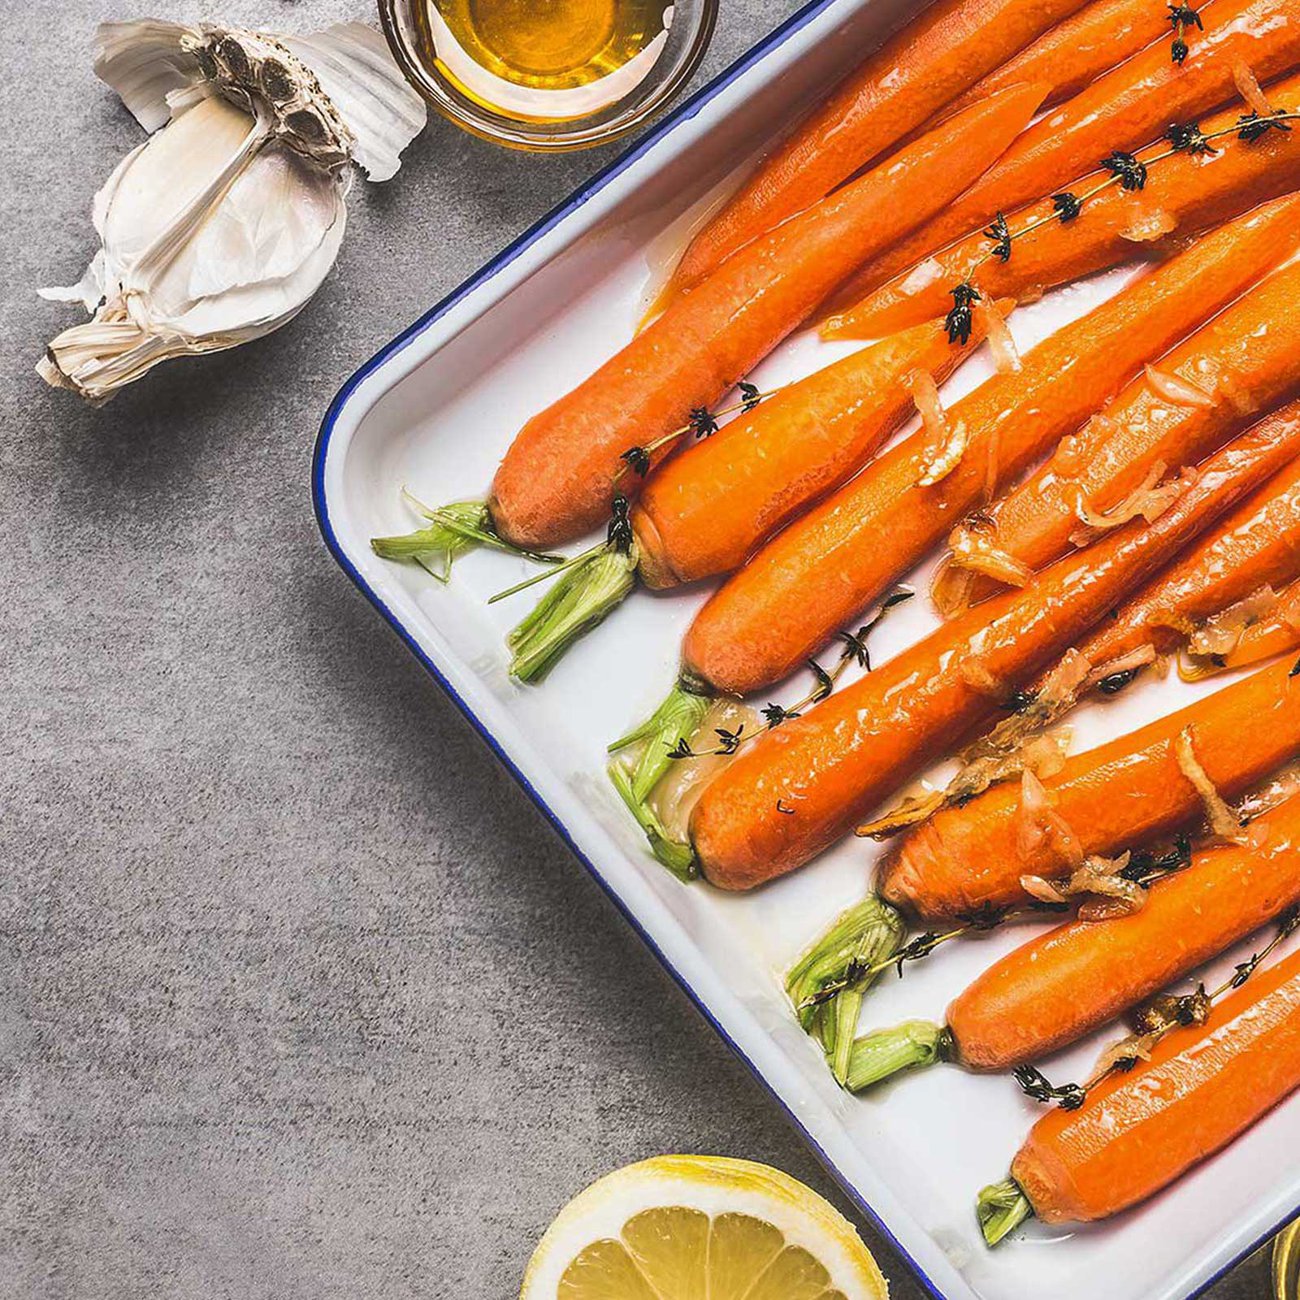 A drizzle of Honey on carrots before roasting for a sweeter flavour